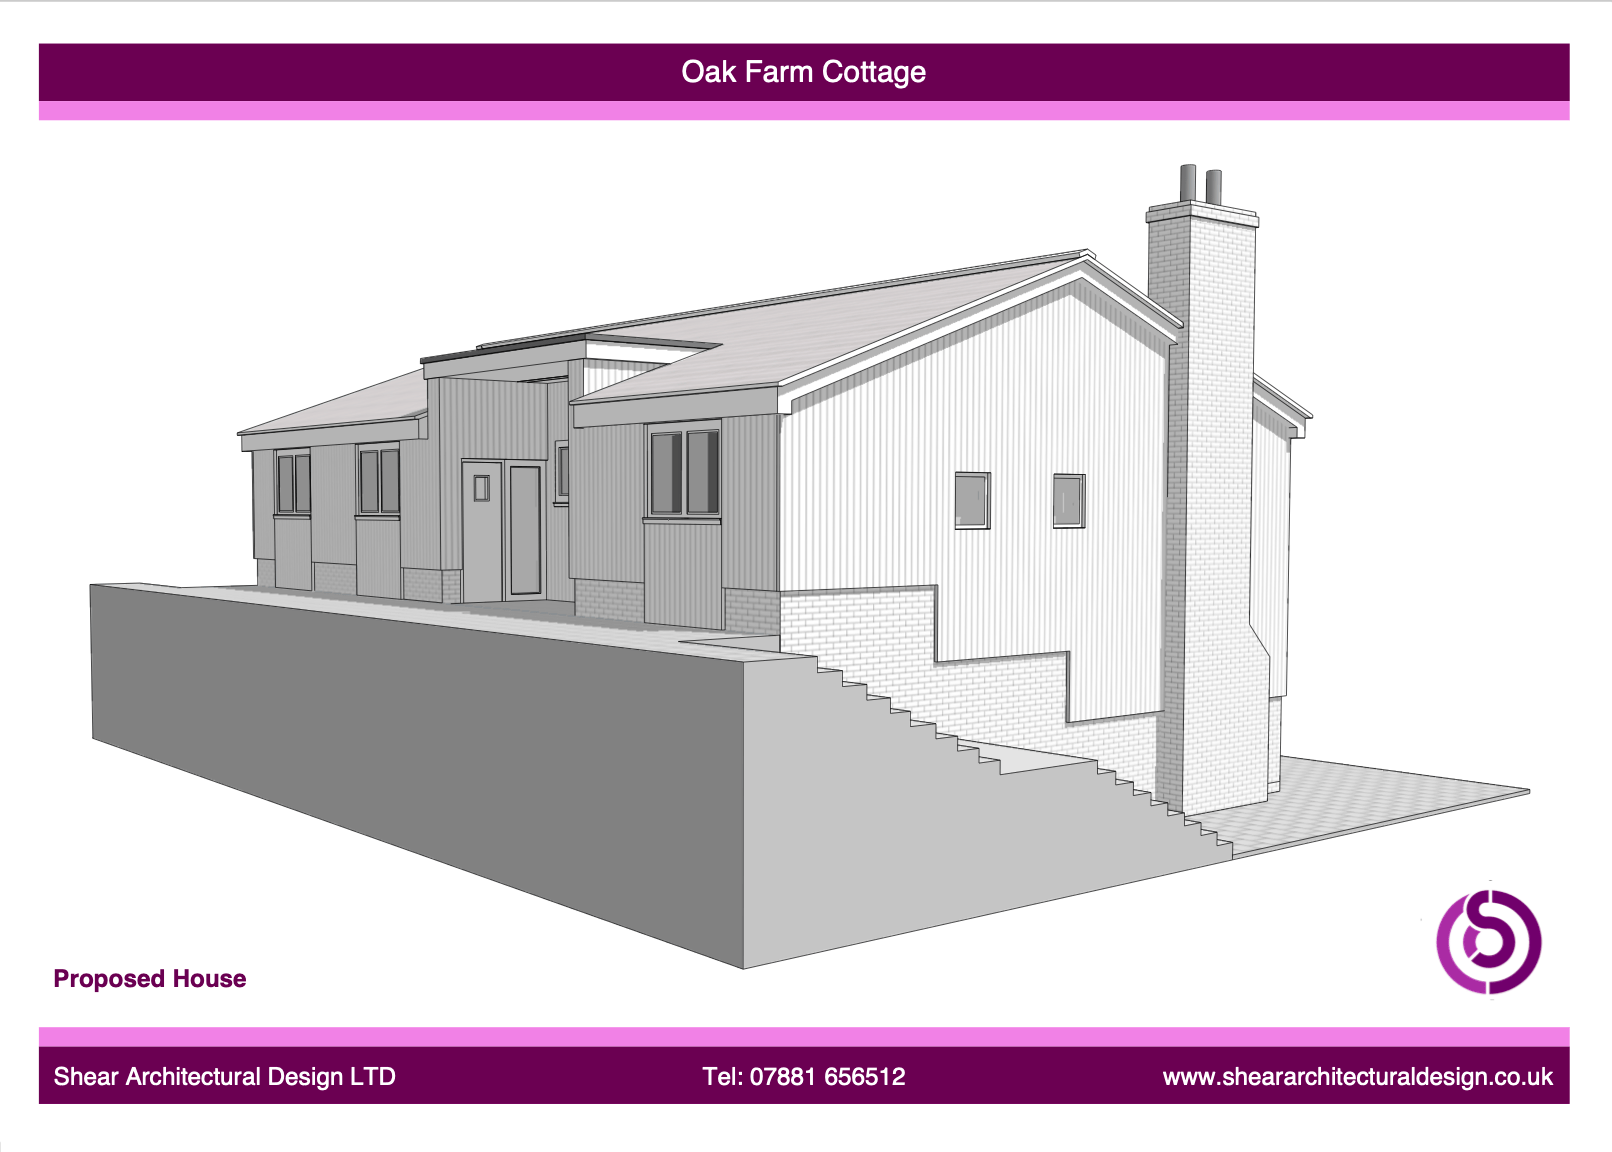 Artistic drawing of a mid-Sussex barn with a contemporary design, split levels, part green roof, and double vaulted glazed gable end for picturesque countryside views